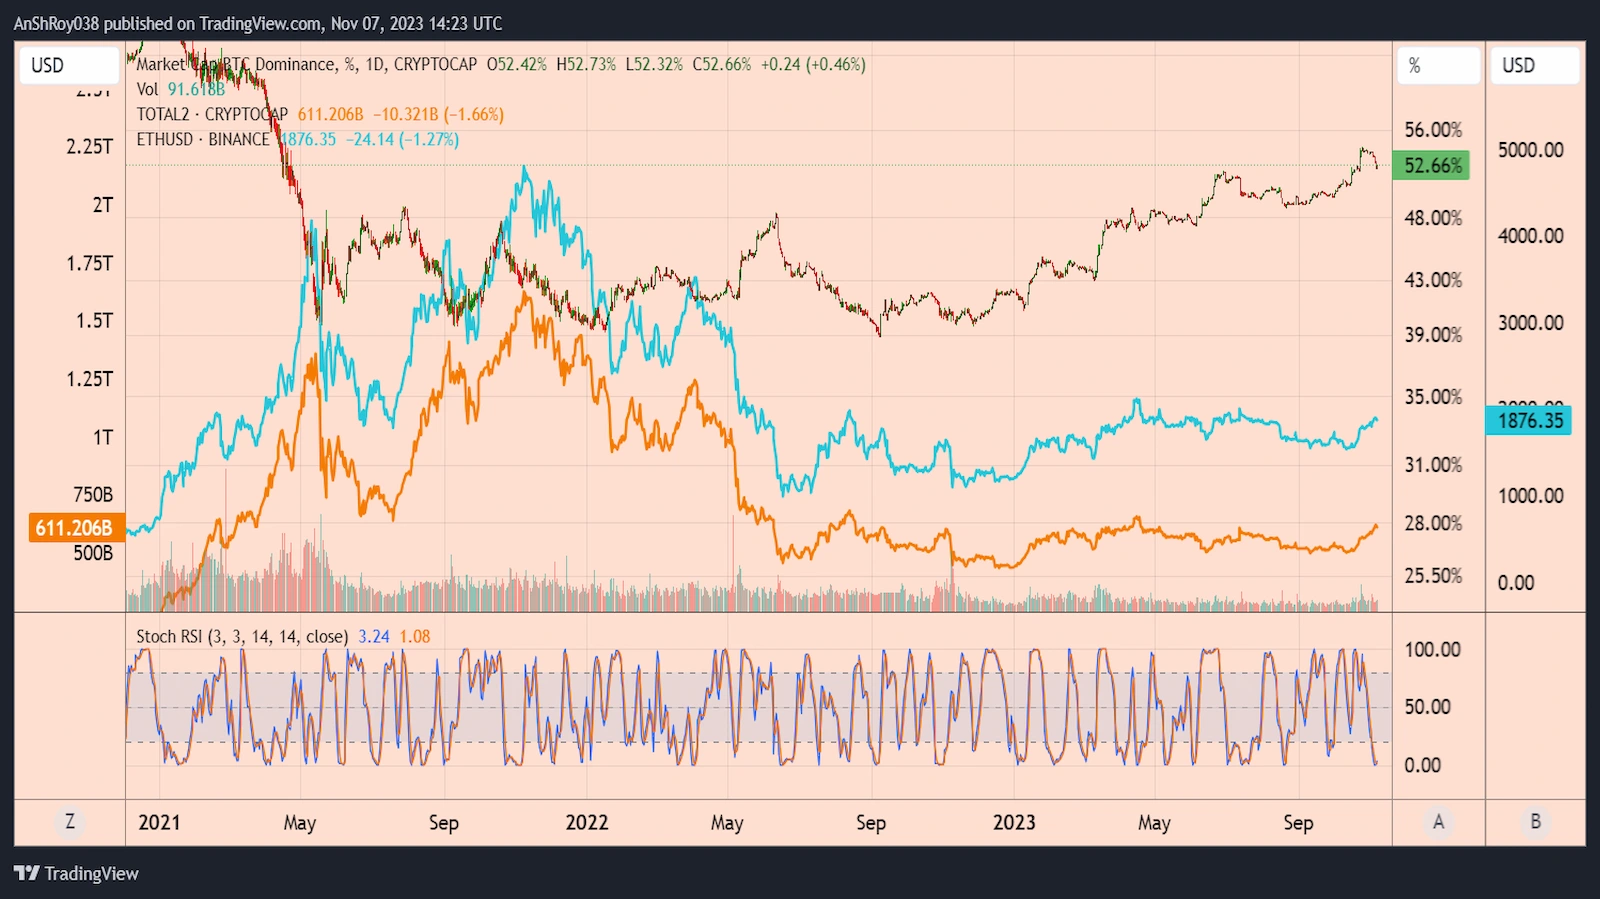 Bitcoin dominance, altcoin market cap, and ETHUSD daily price chart since 2021.